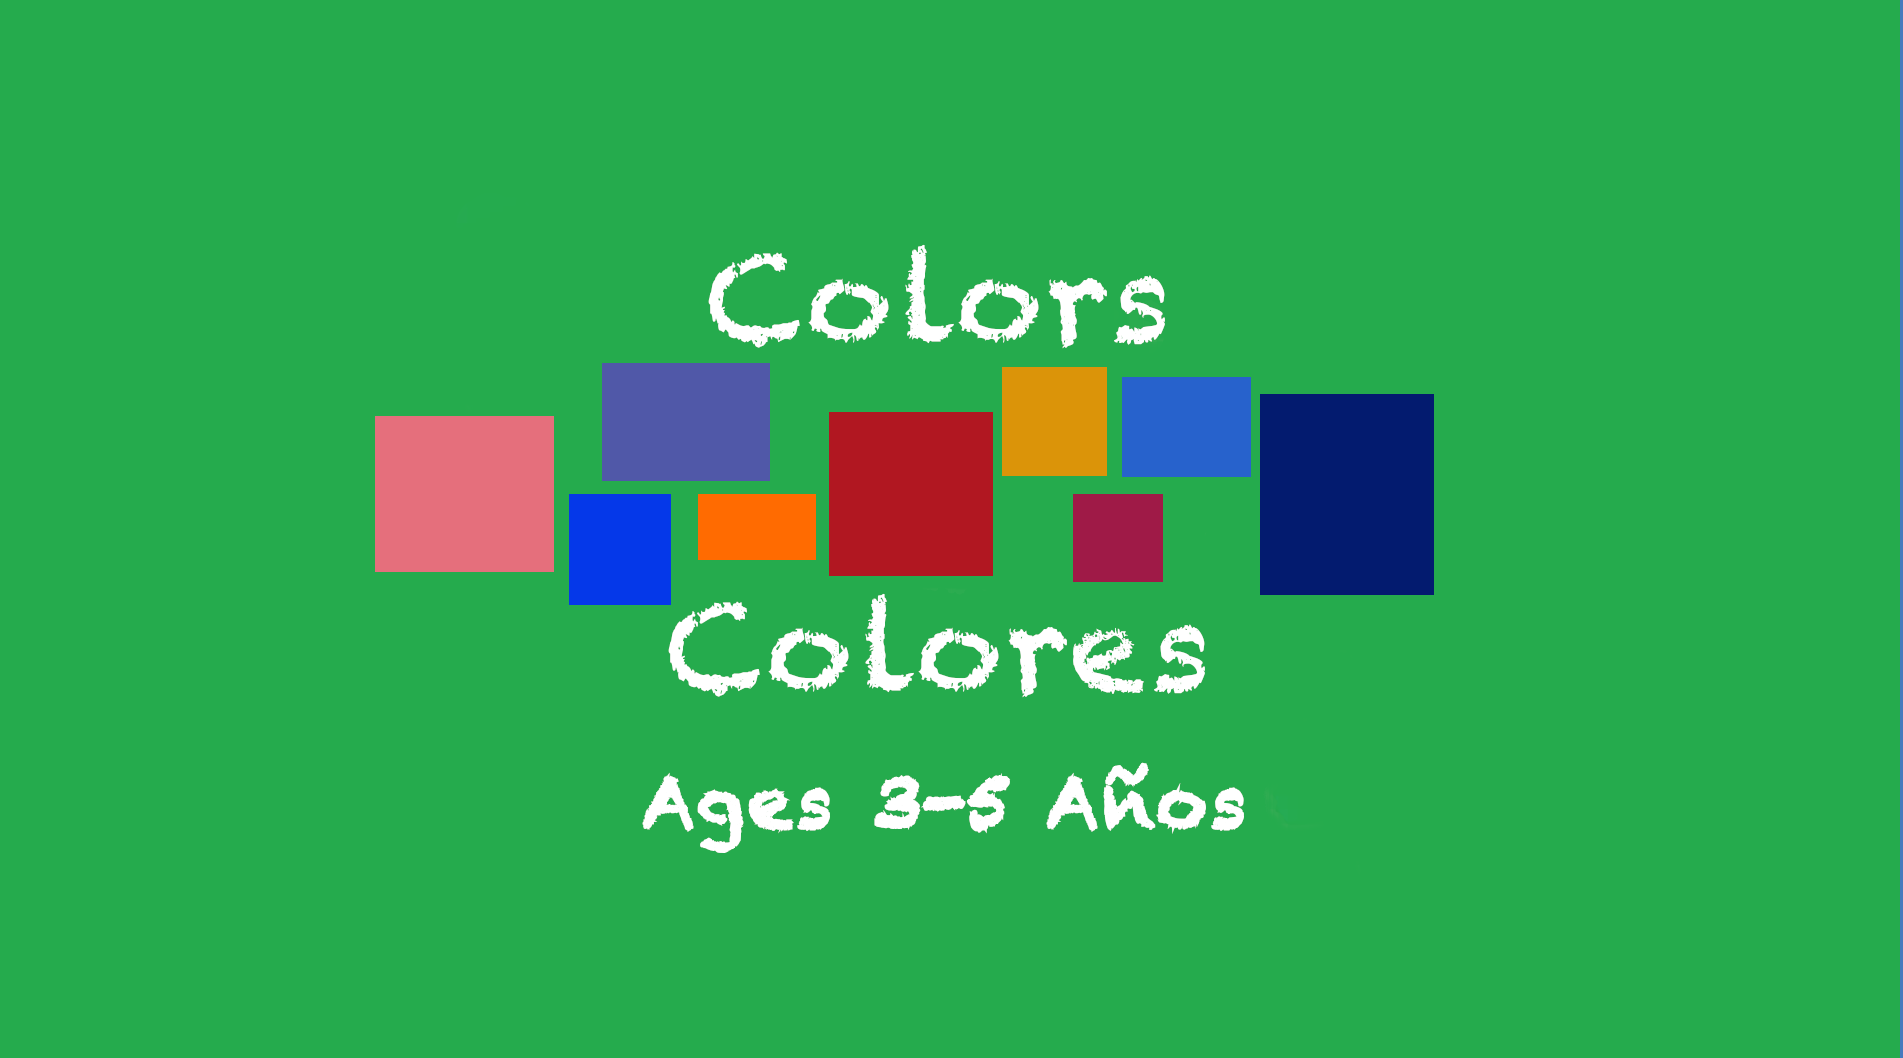 Colors for 3-5 year olds